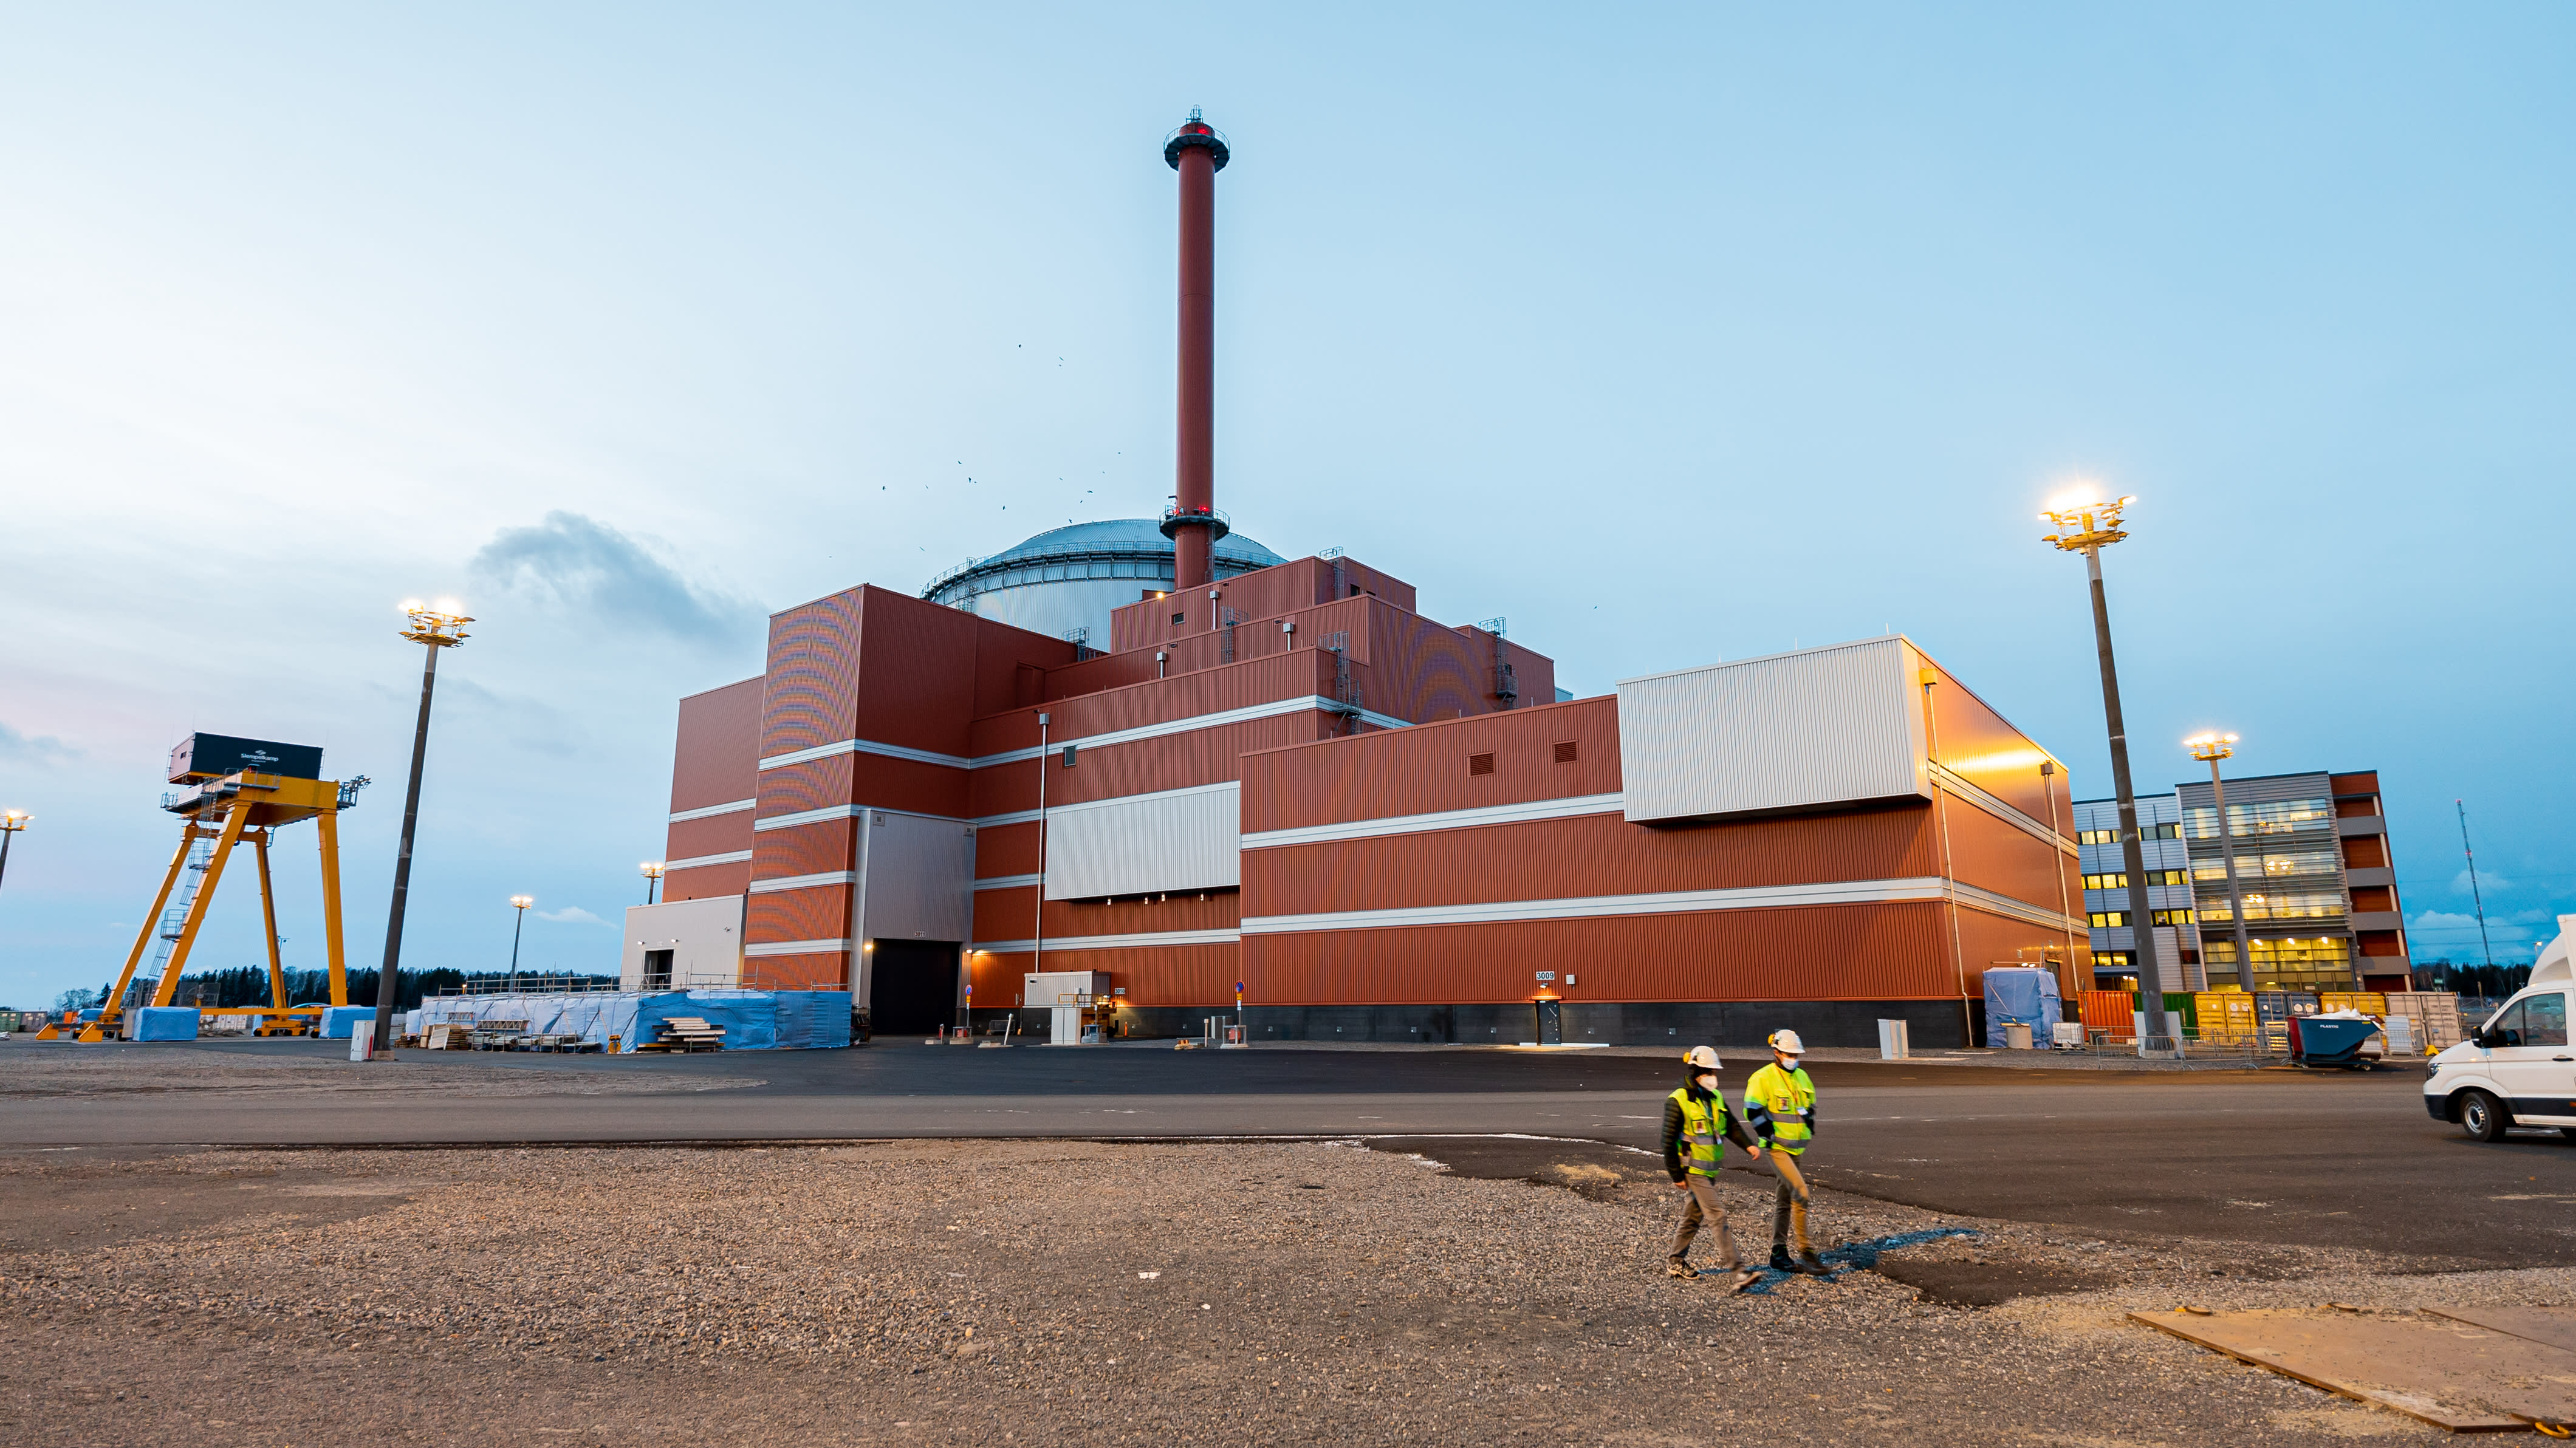 The energy company will increase Olkiluoto 3’s capacity to more than 30 percent